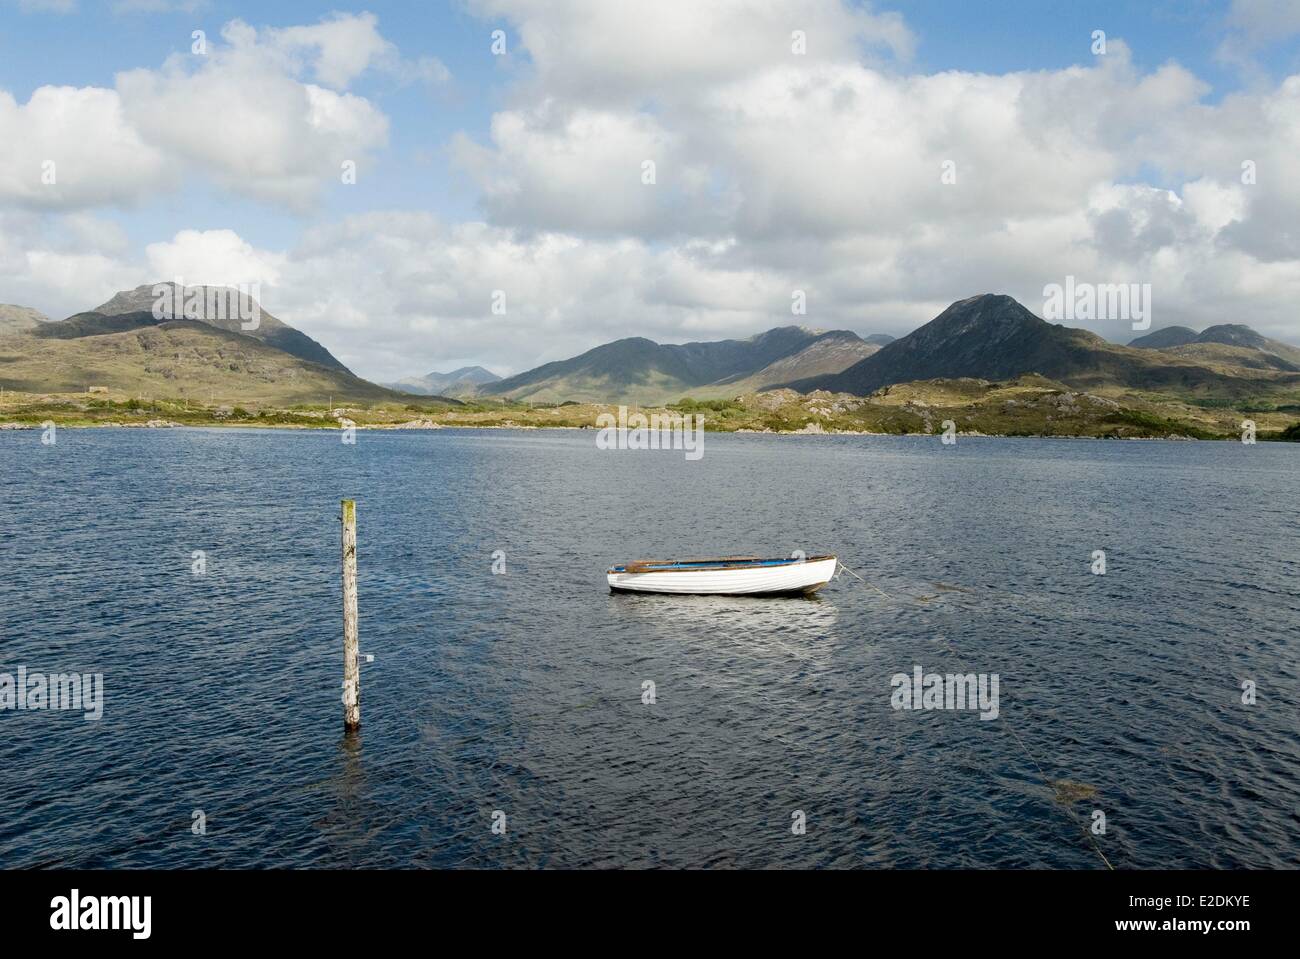 Ireland Galway County Ballynakill Connemara wooden boat in the port of Ballynakill Tully and Twelve Bens mountains in the Stock Photo